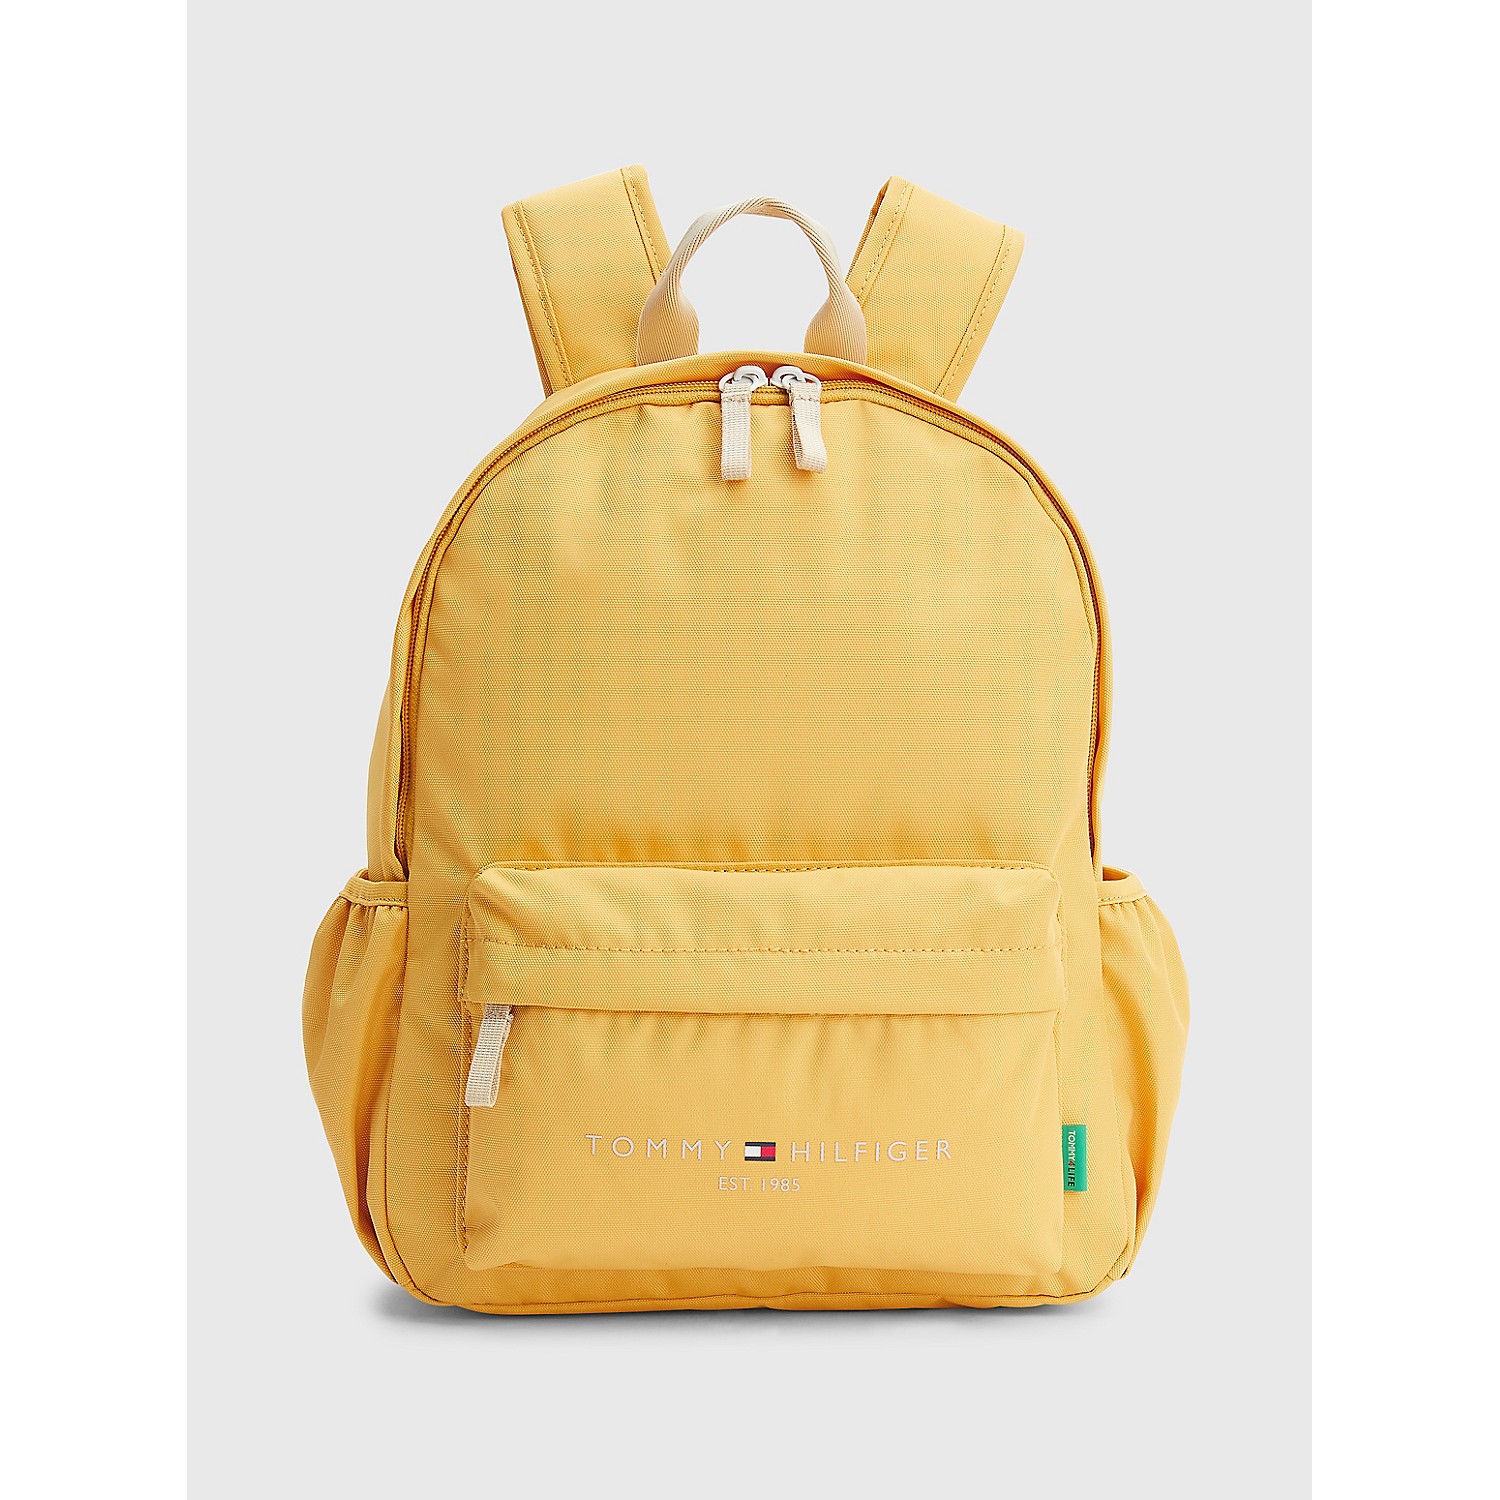 TOMMY HILFIGER Kids Classic Backpack